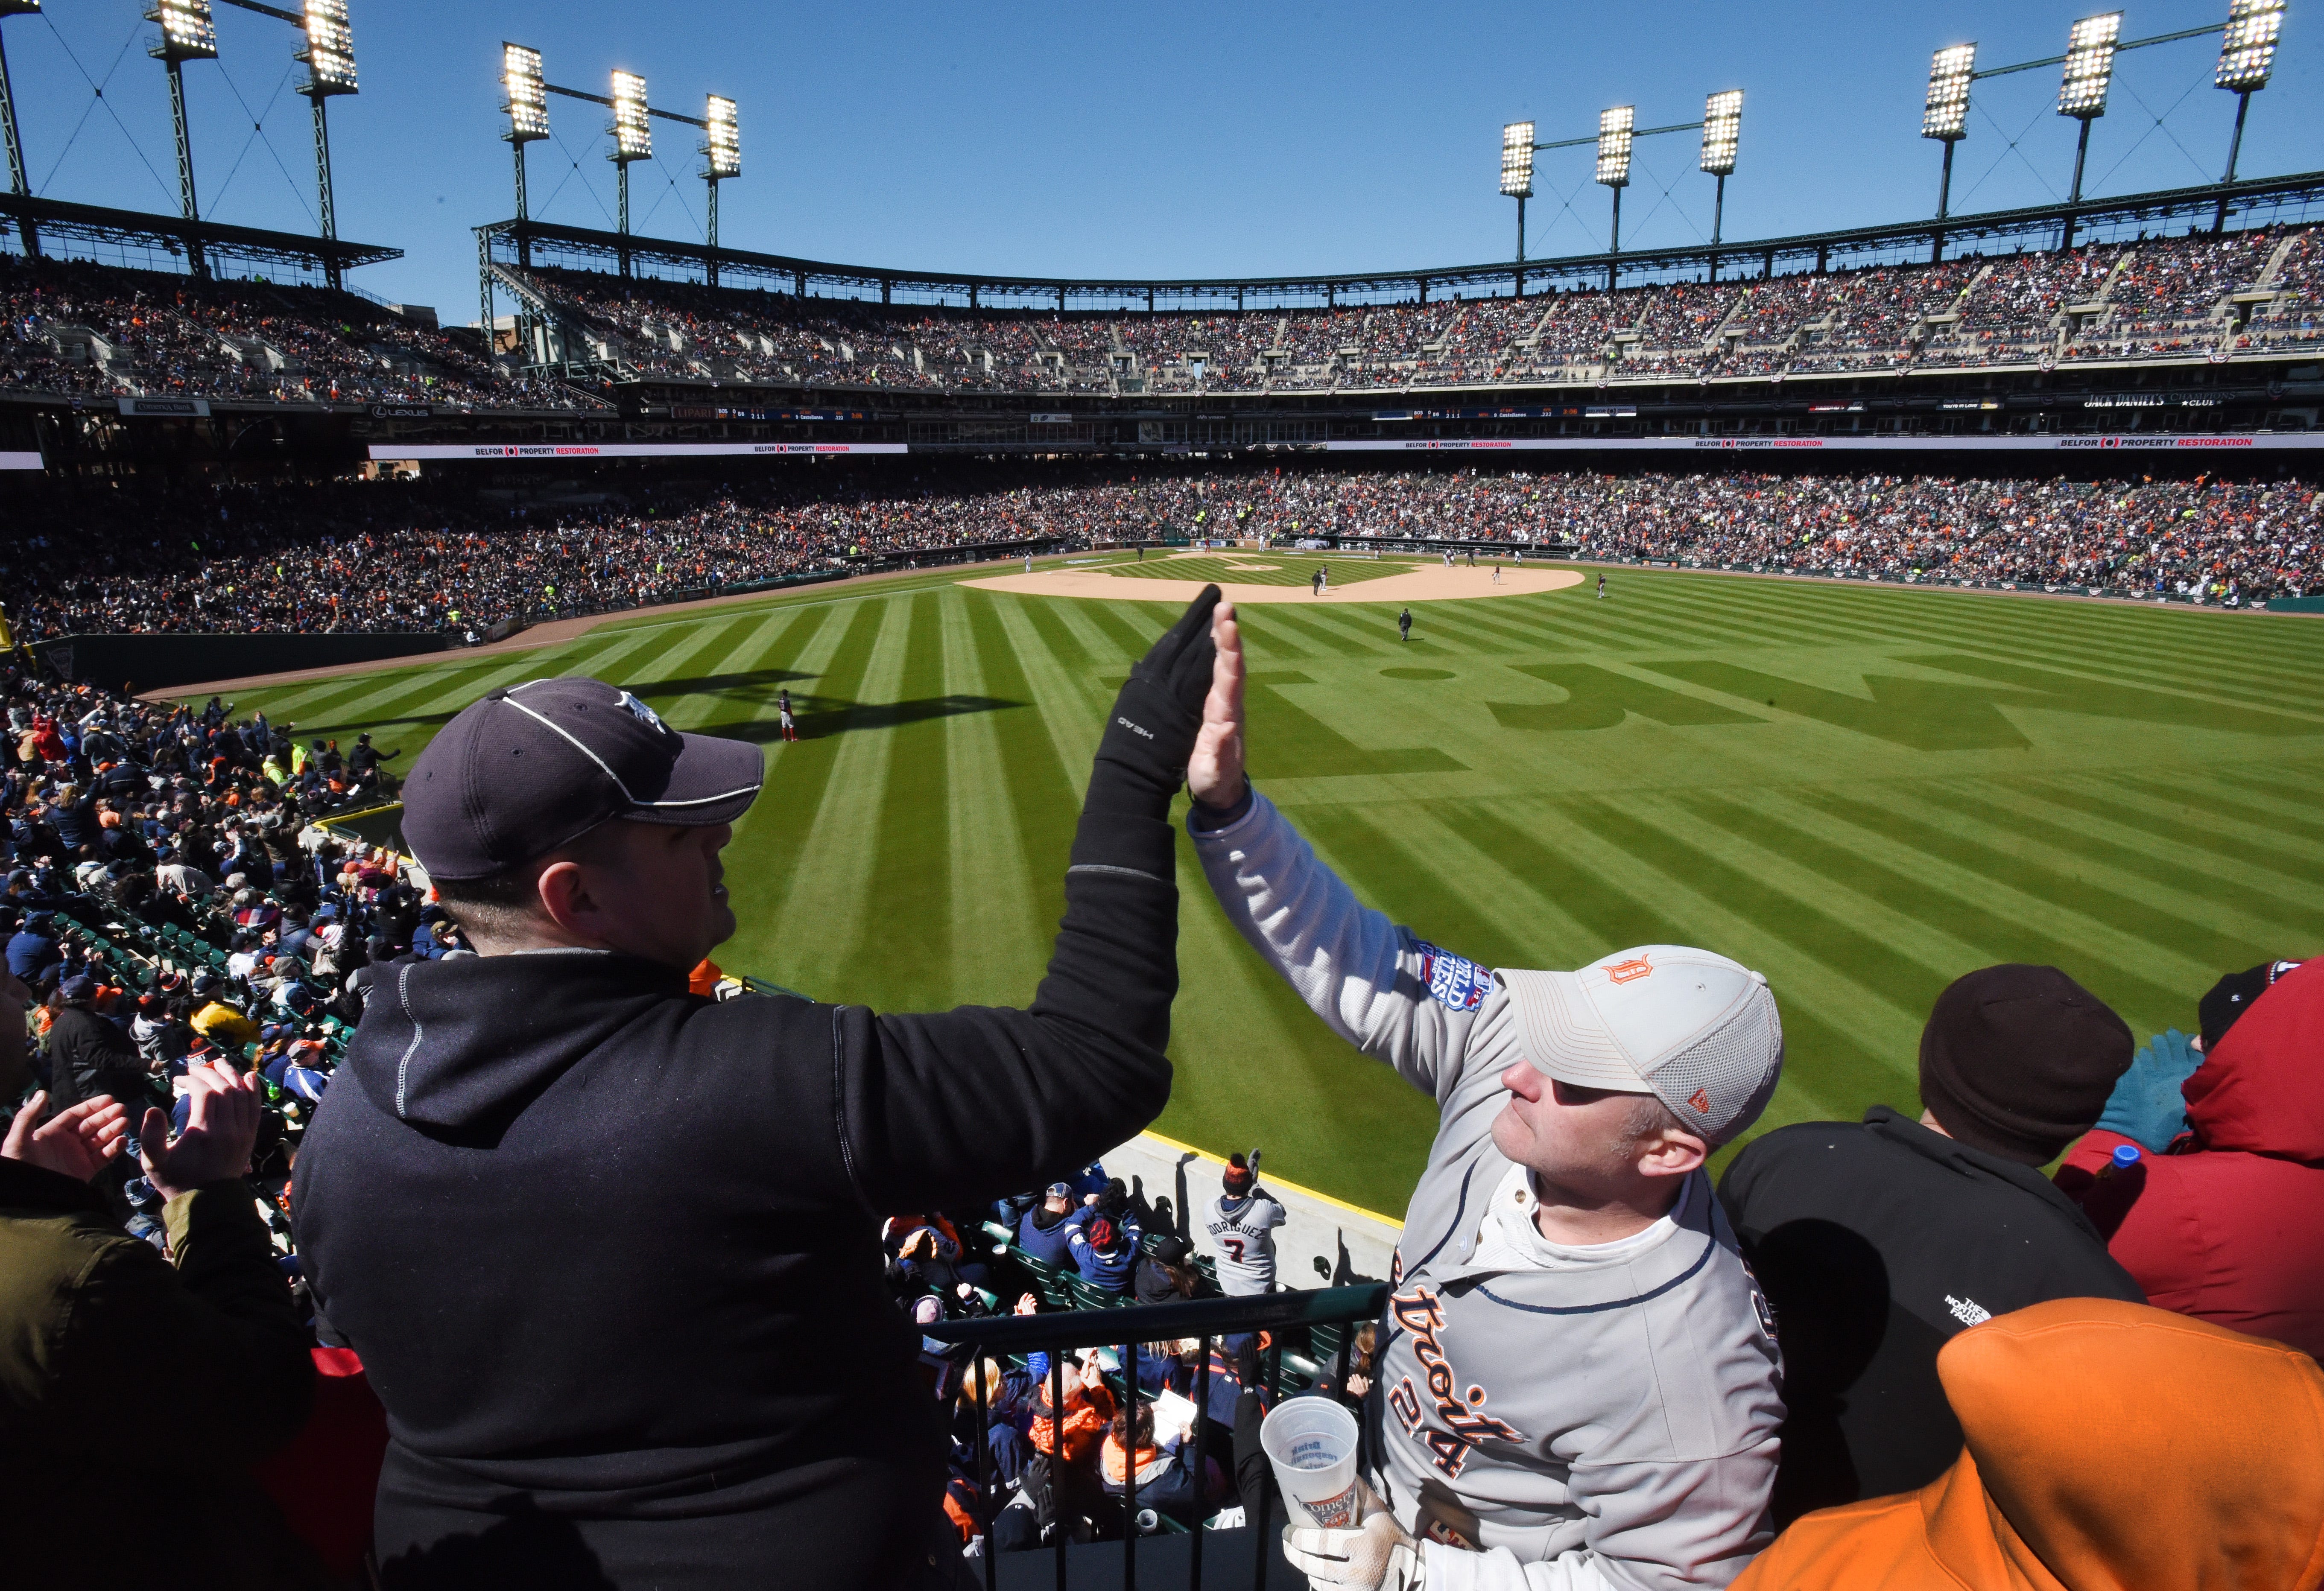 Tom Renner and Larry Griffin 'high-5' after a triple by Nick Castellanos in the bottom of the 6th inning. MLB Detroit Tigers opening day against the Boston Red Sox at Comerica Park in Detroit, Michigan on April 7, 2017.